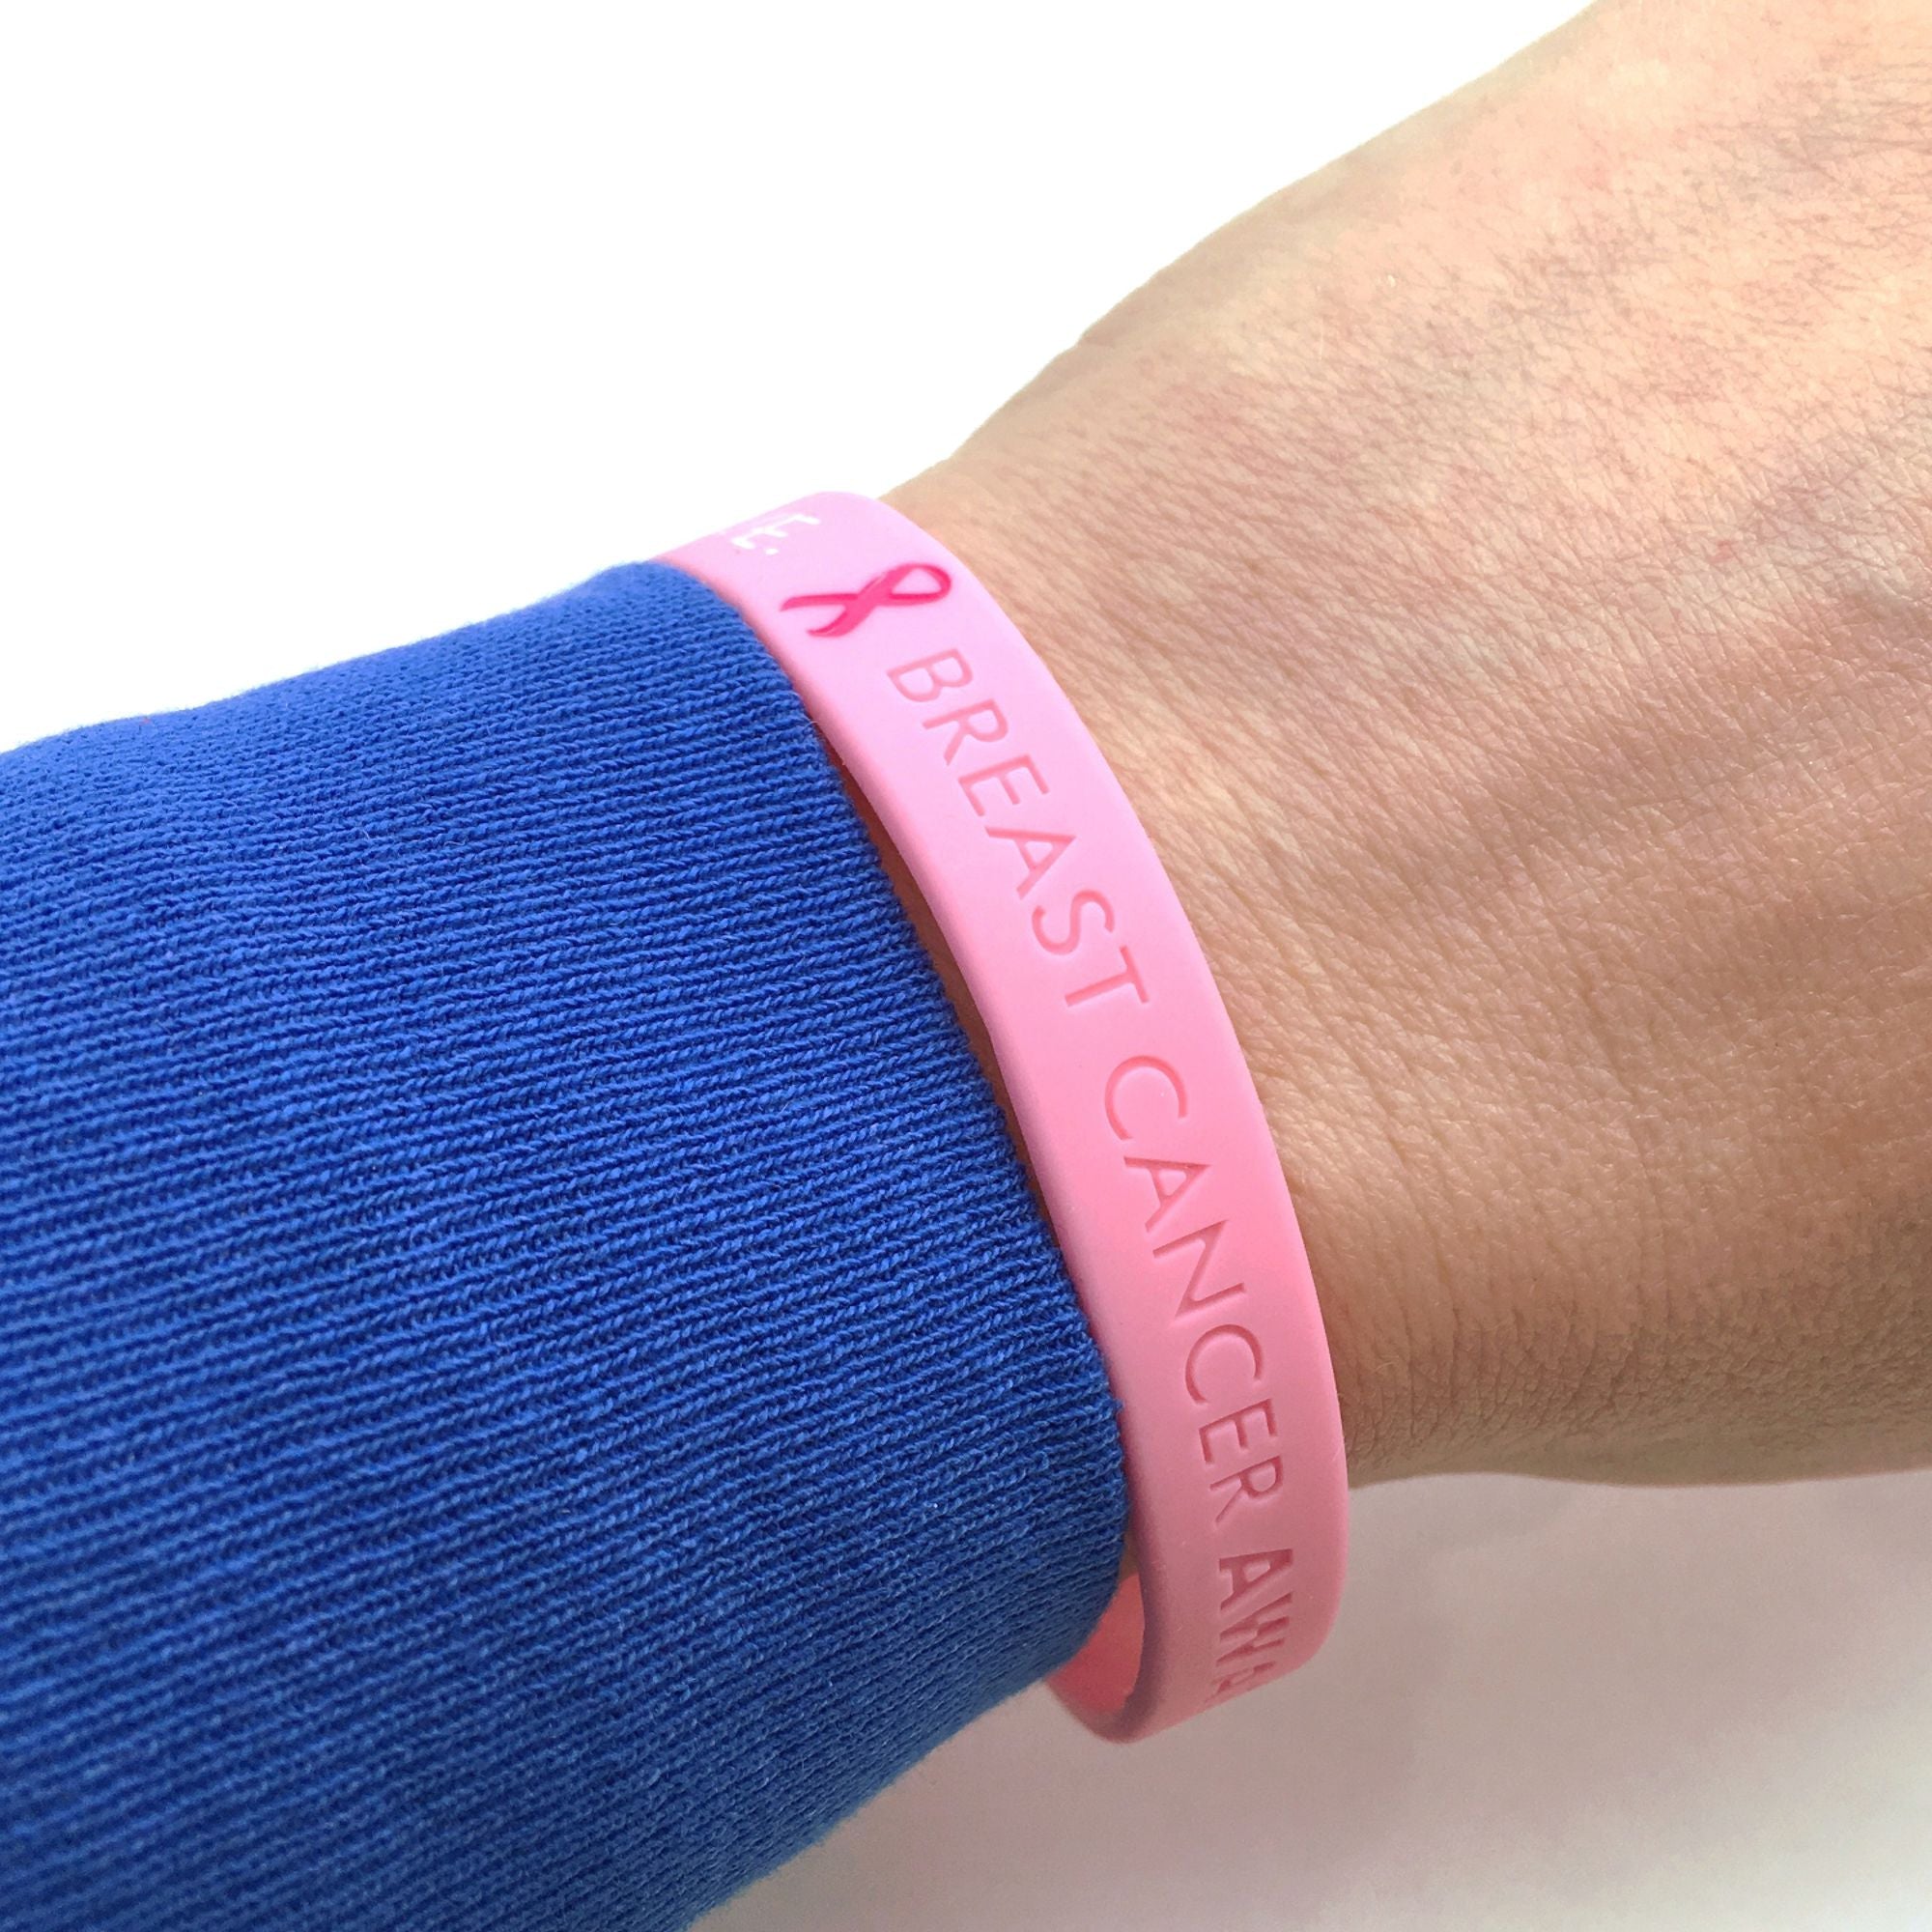 CDH International - A Global Initiative to Stop Congenital Diaphragmatic  Hernia - CDH Awareness Bracelets – Available in the Shop today!